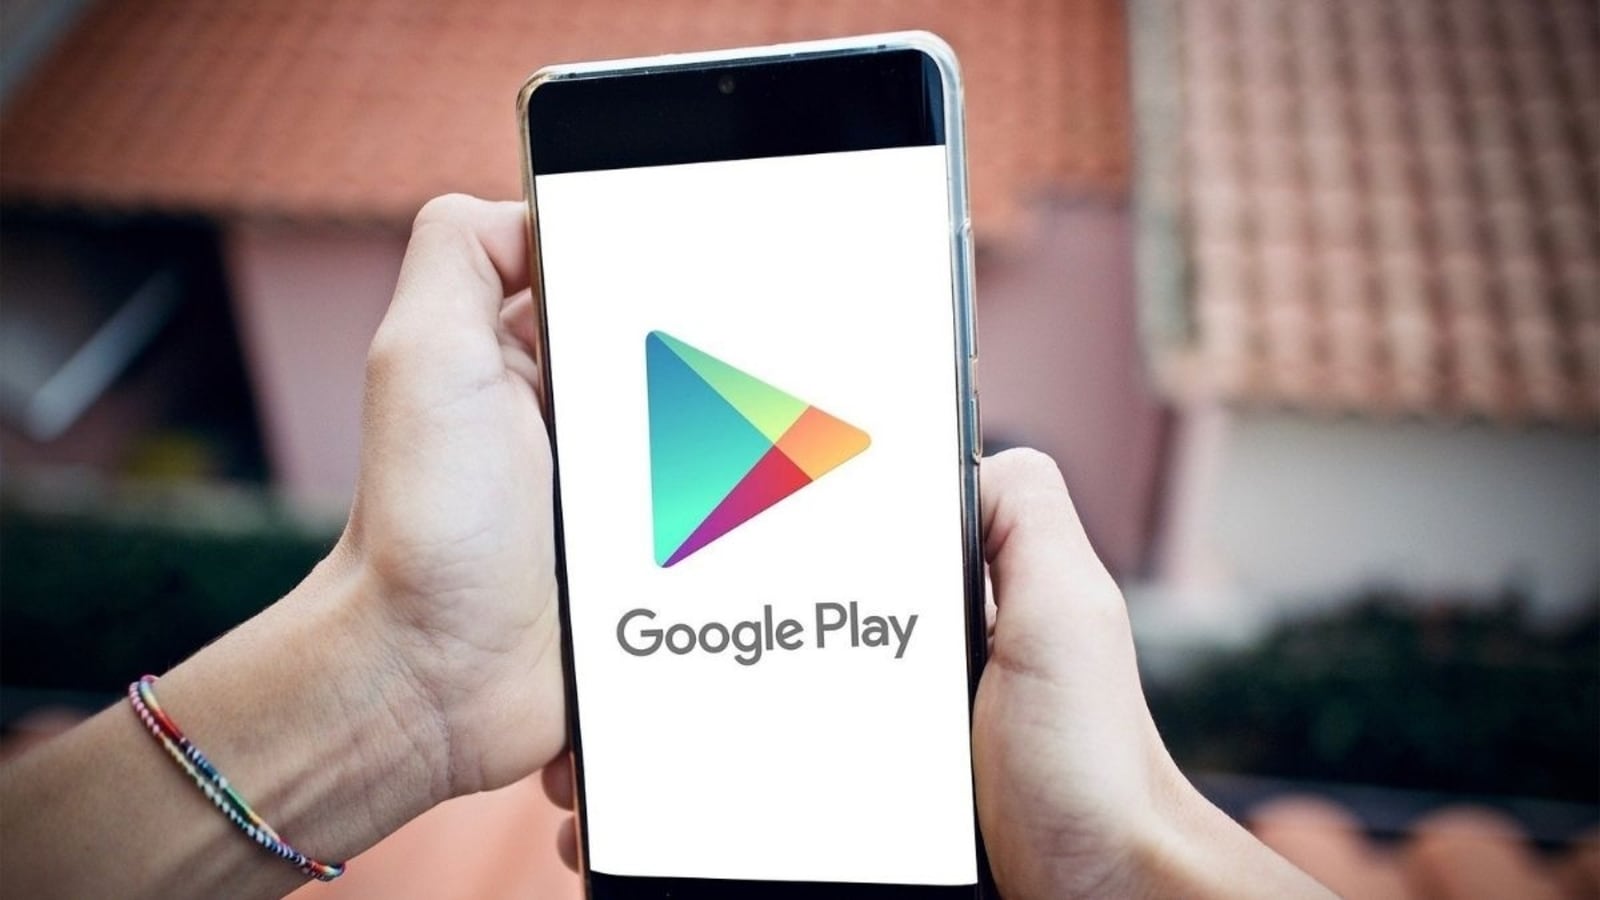 For Google Play, Dominating the Android World Was ‘Existential’